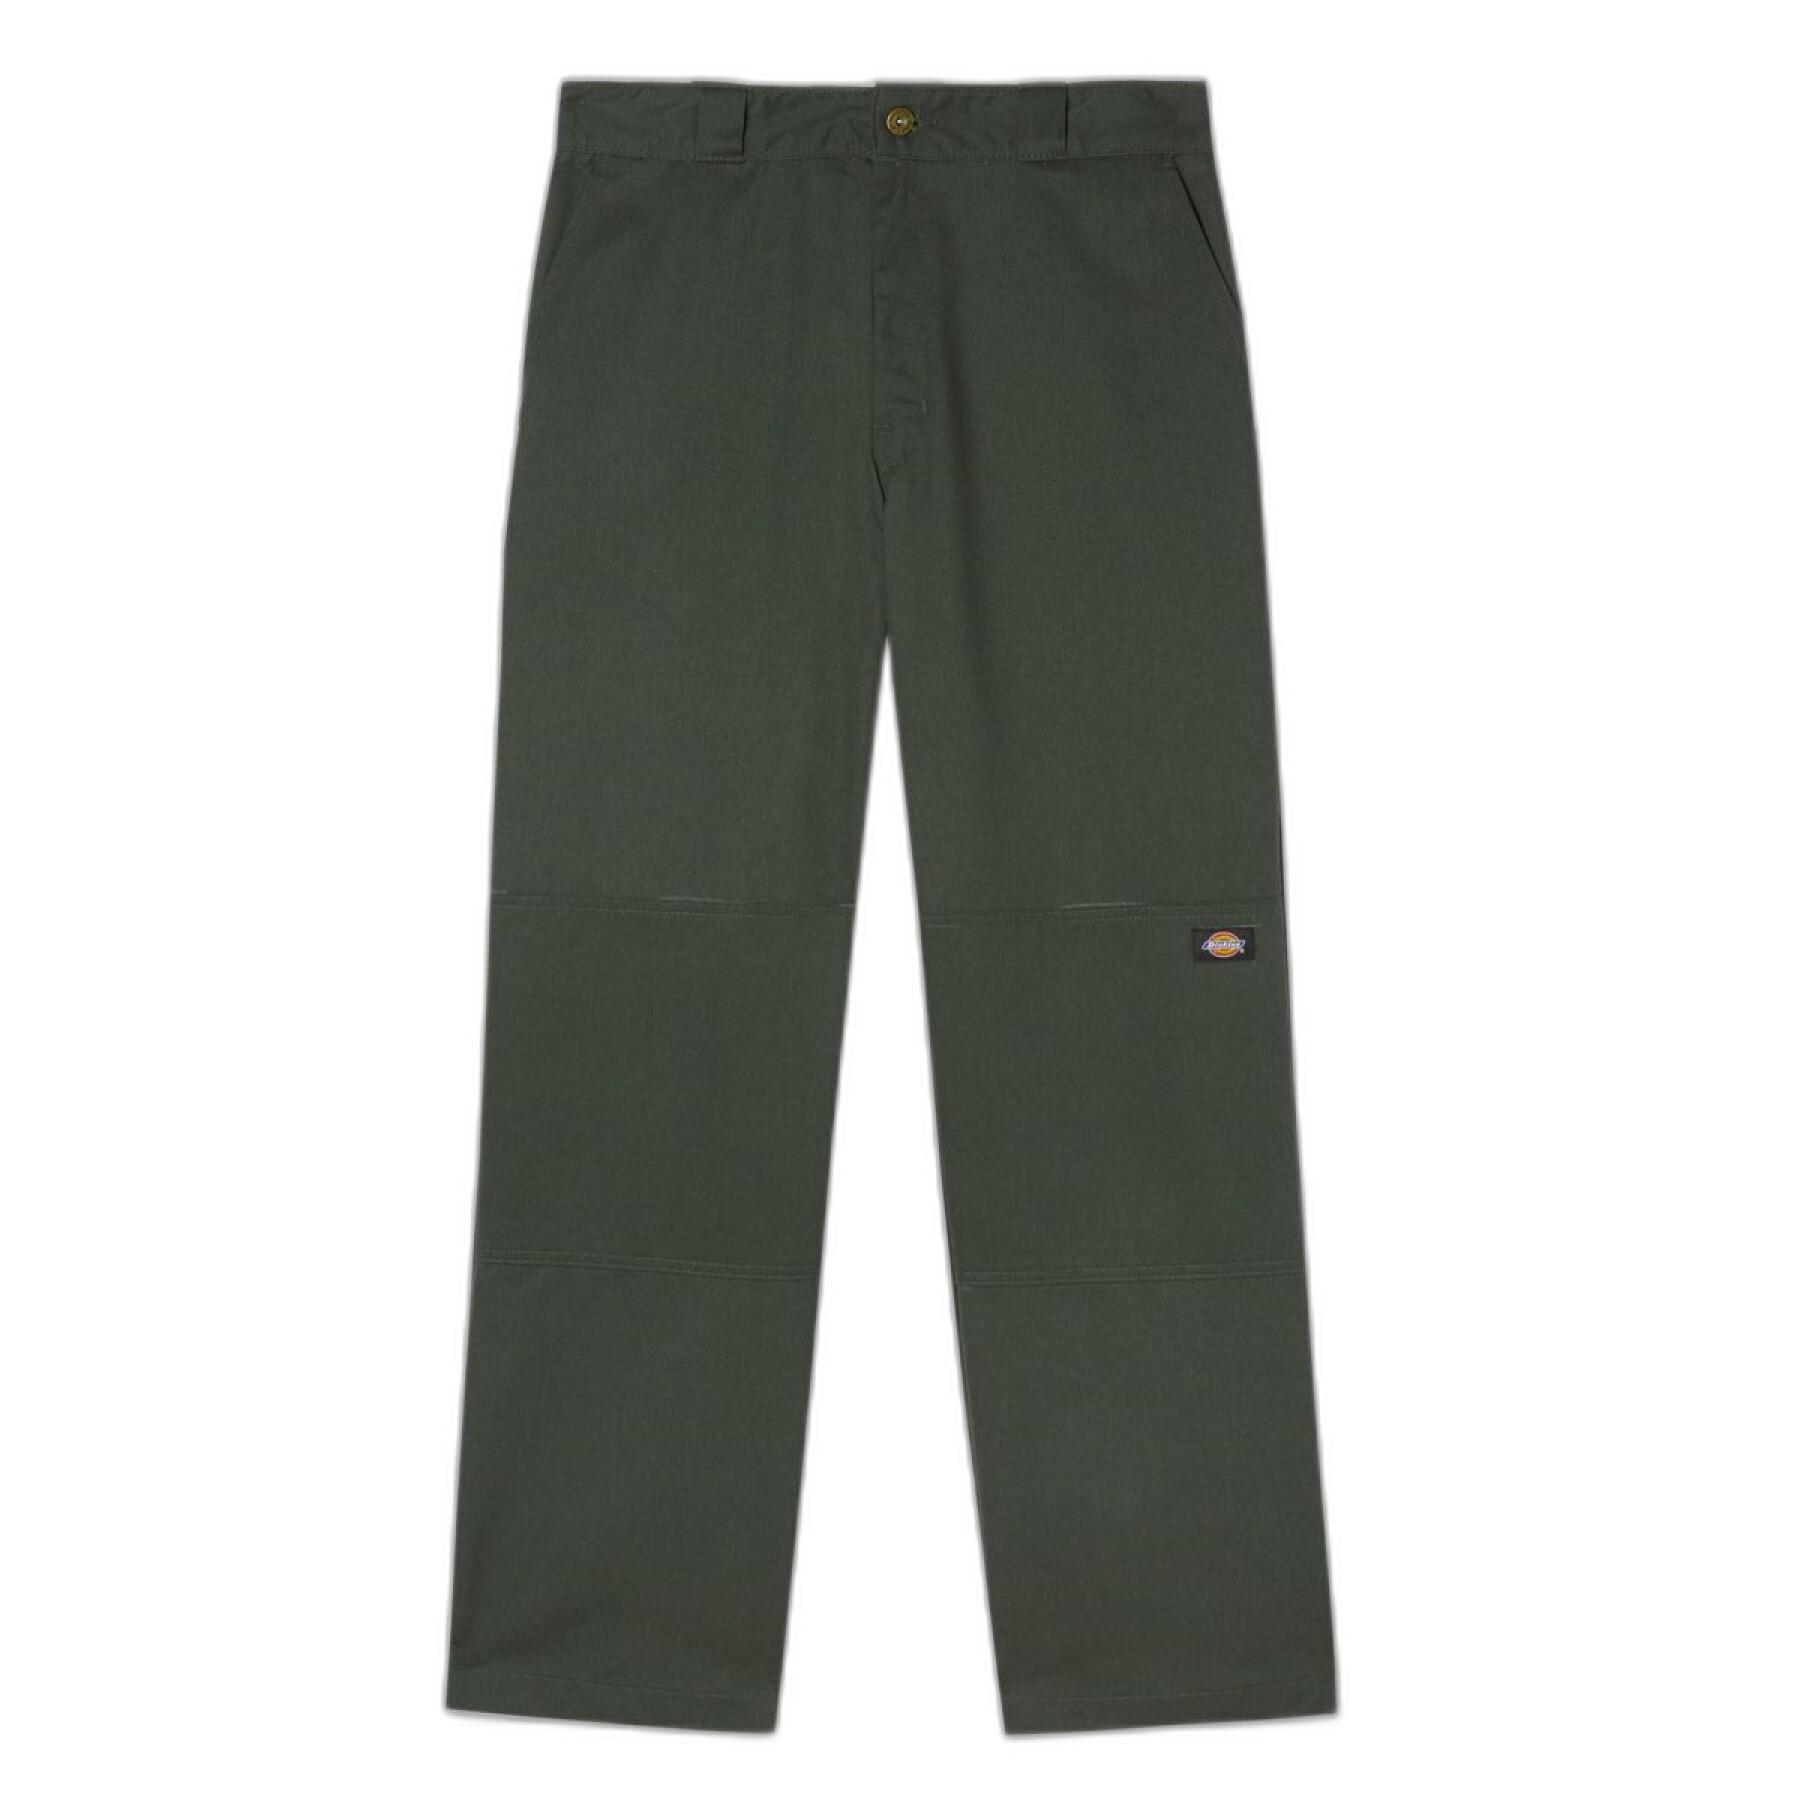 Dickies 874 Ori Fit in Olive Green, Women's Fashion, Bottoms